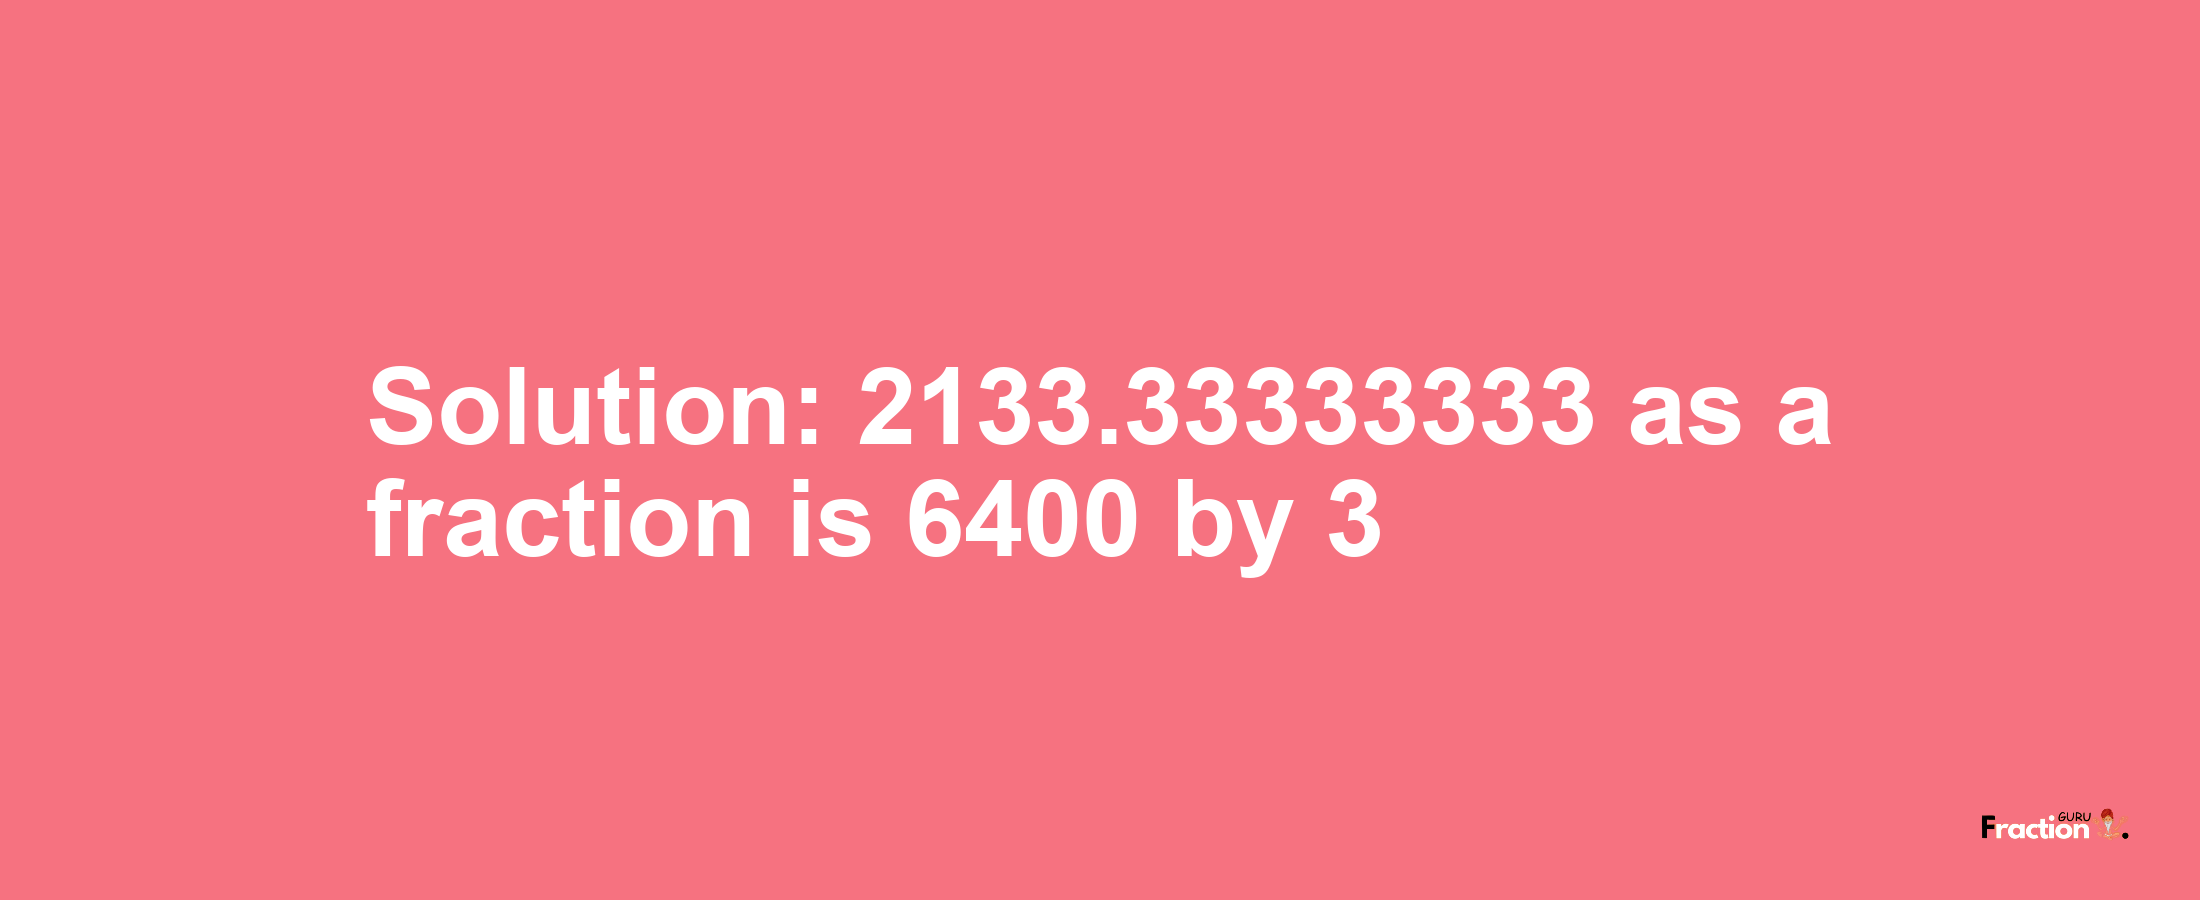 Solution:2133.33333333 as a fraction is 6400/3